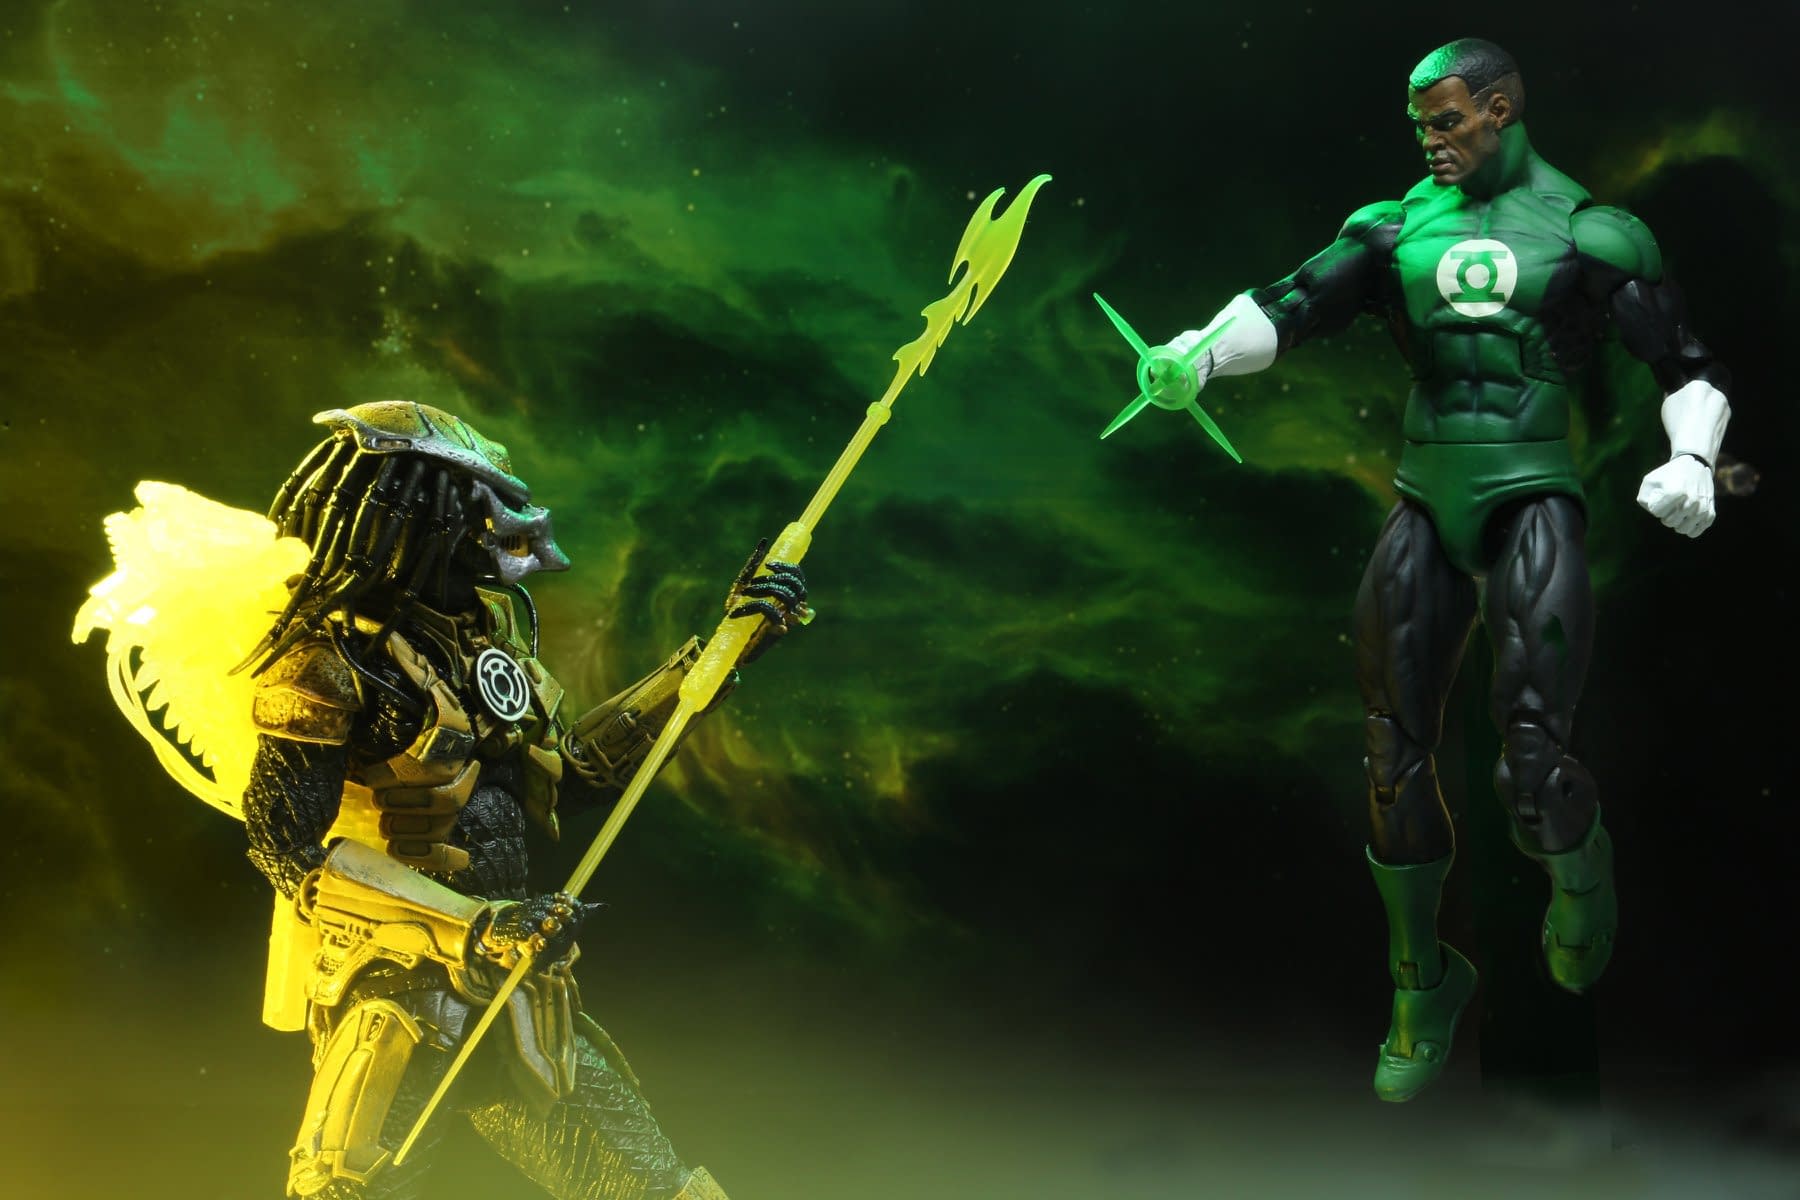 The Predator is a Yellow Lantern in the NYCC Exclusive from NECA